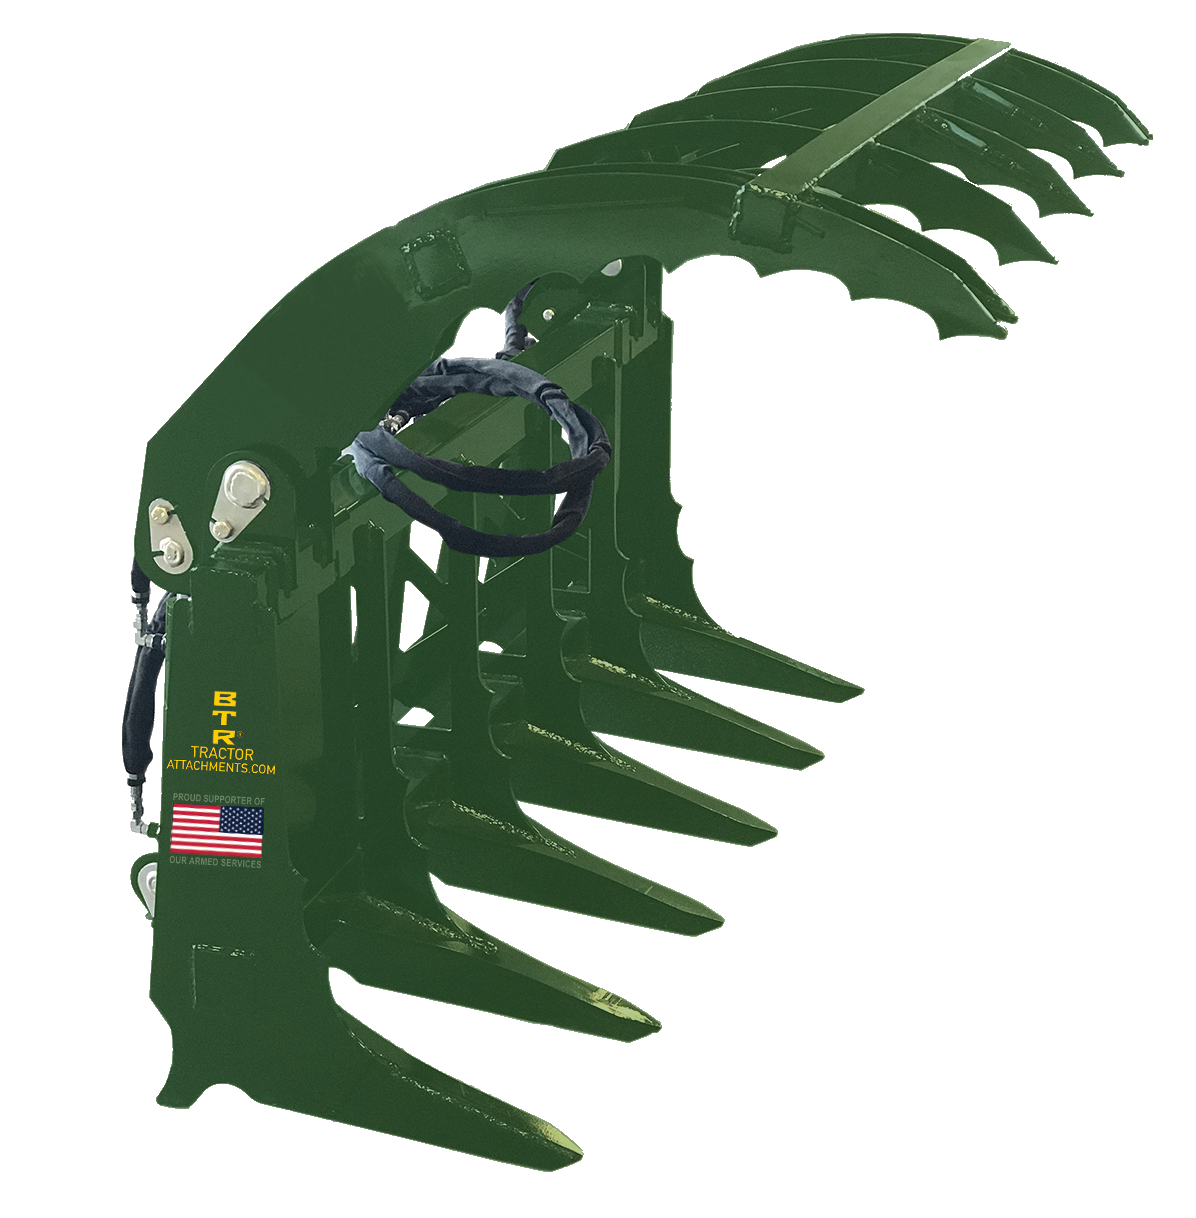 Bigtoolrack Extreme Granite Grapple Fits John Deere Quick Attach Loaders (Short Lead times we have stock in most sizes)